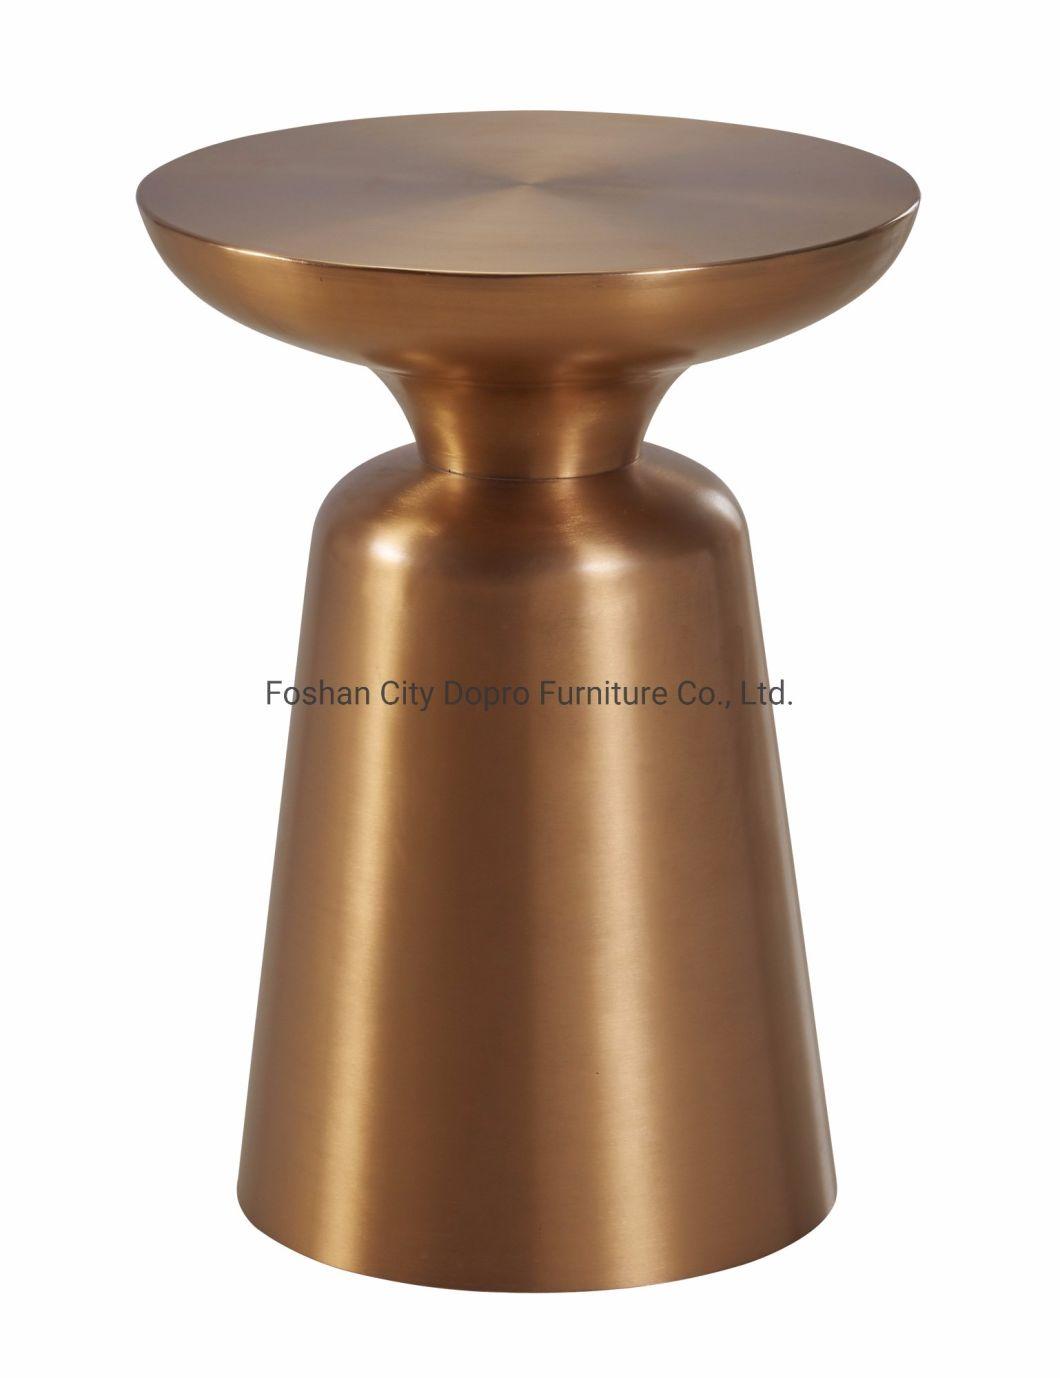 2020 New Luxury Antique End Table Brushed Brass for Hotel and Home